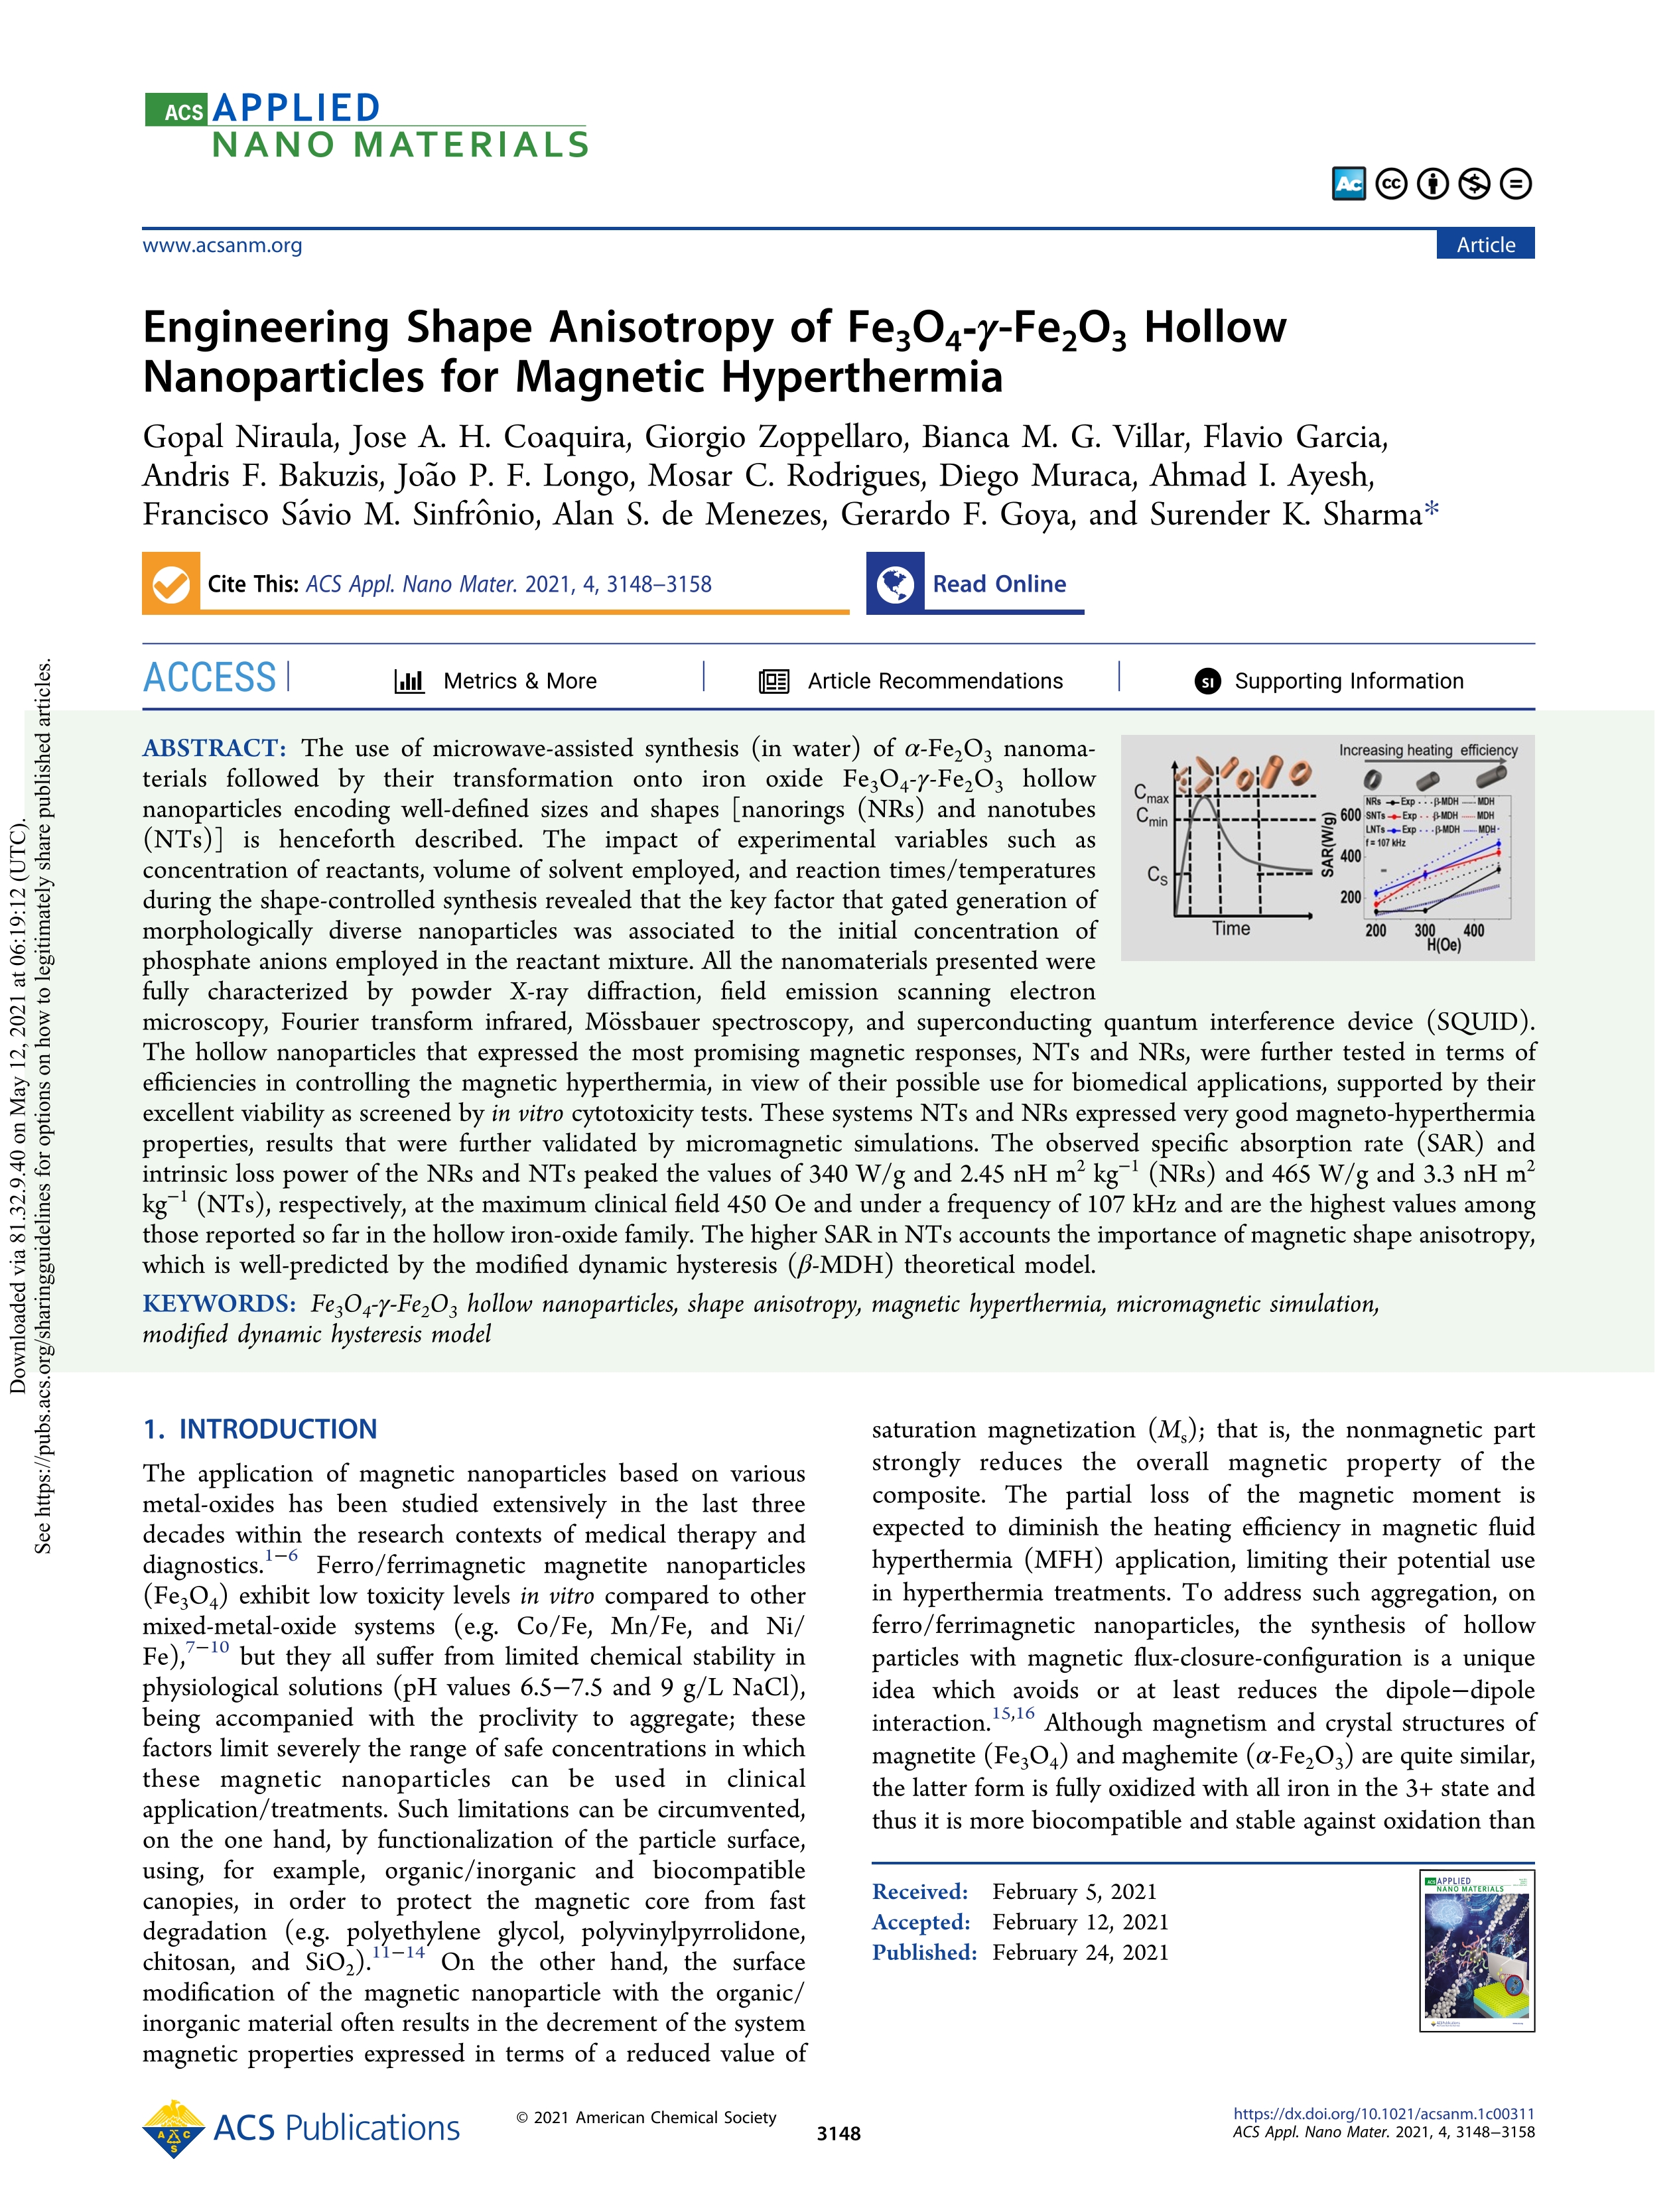 Engineering shape anisotropy of Fe3O4-¿-Fe2O3 hollow nanoparticles for magnetic hyperthermia